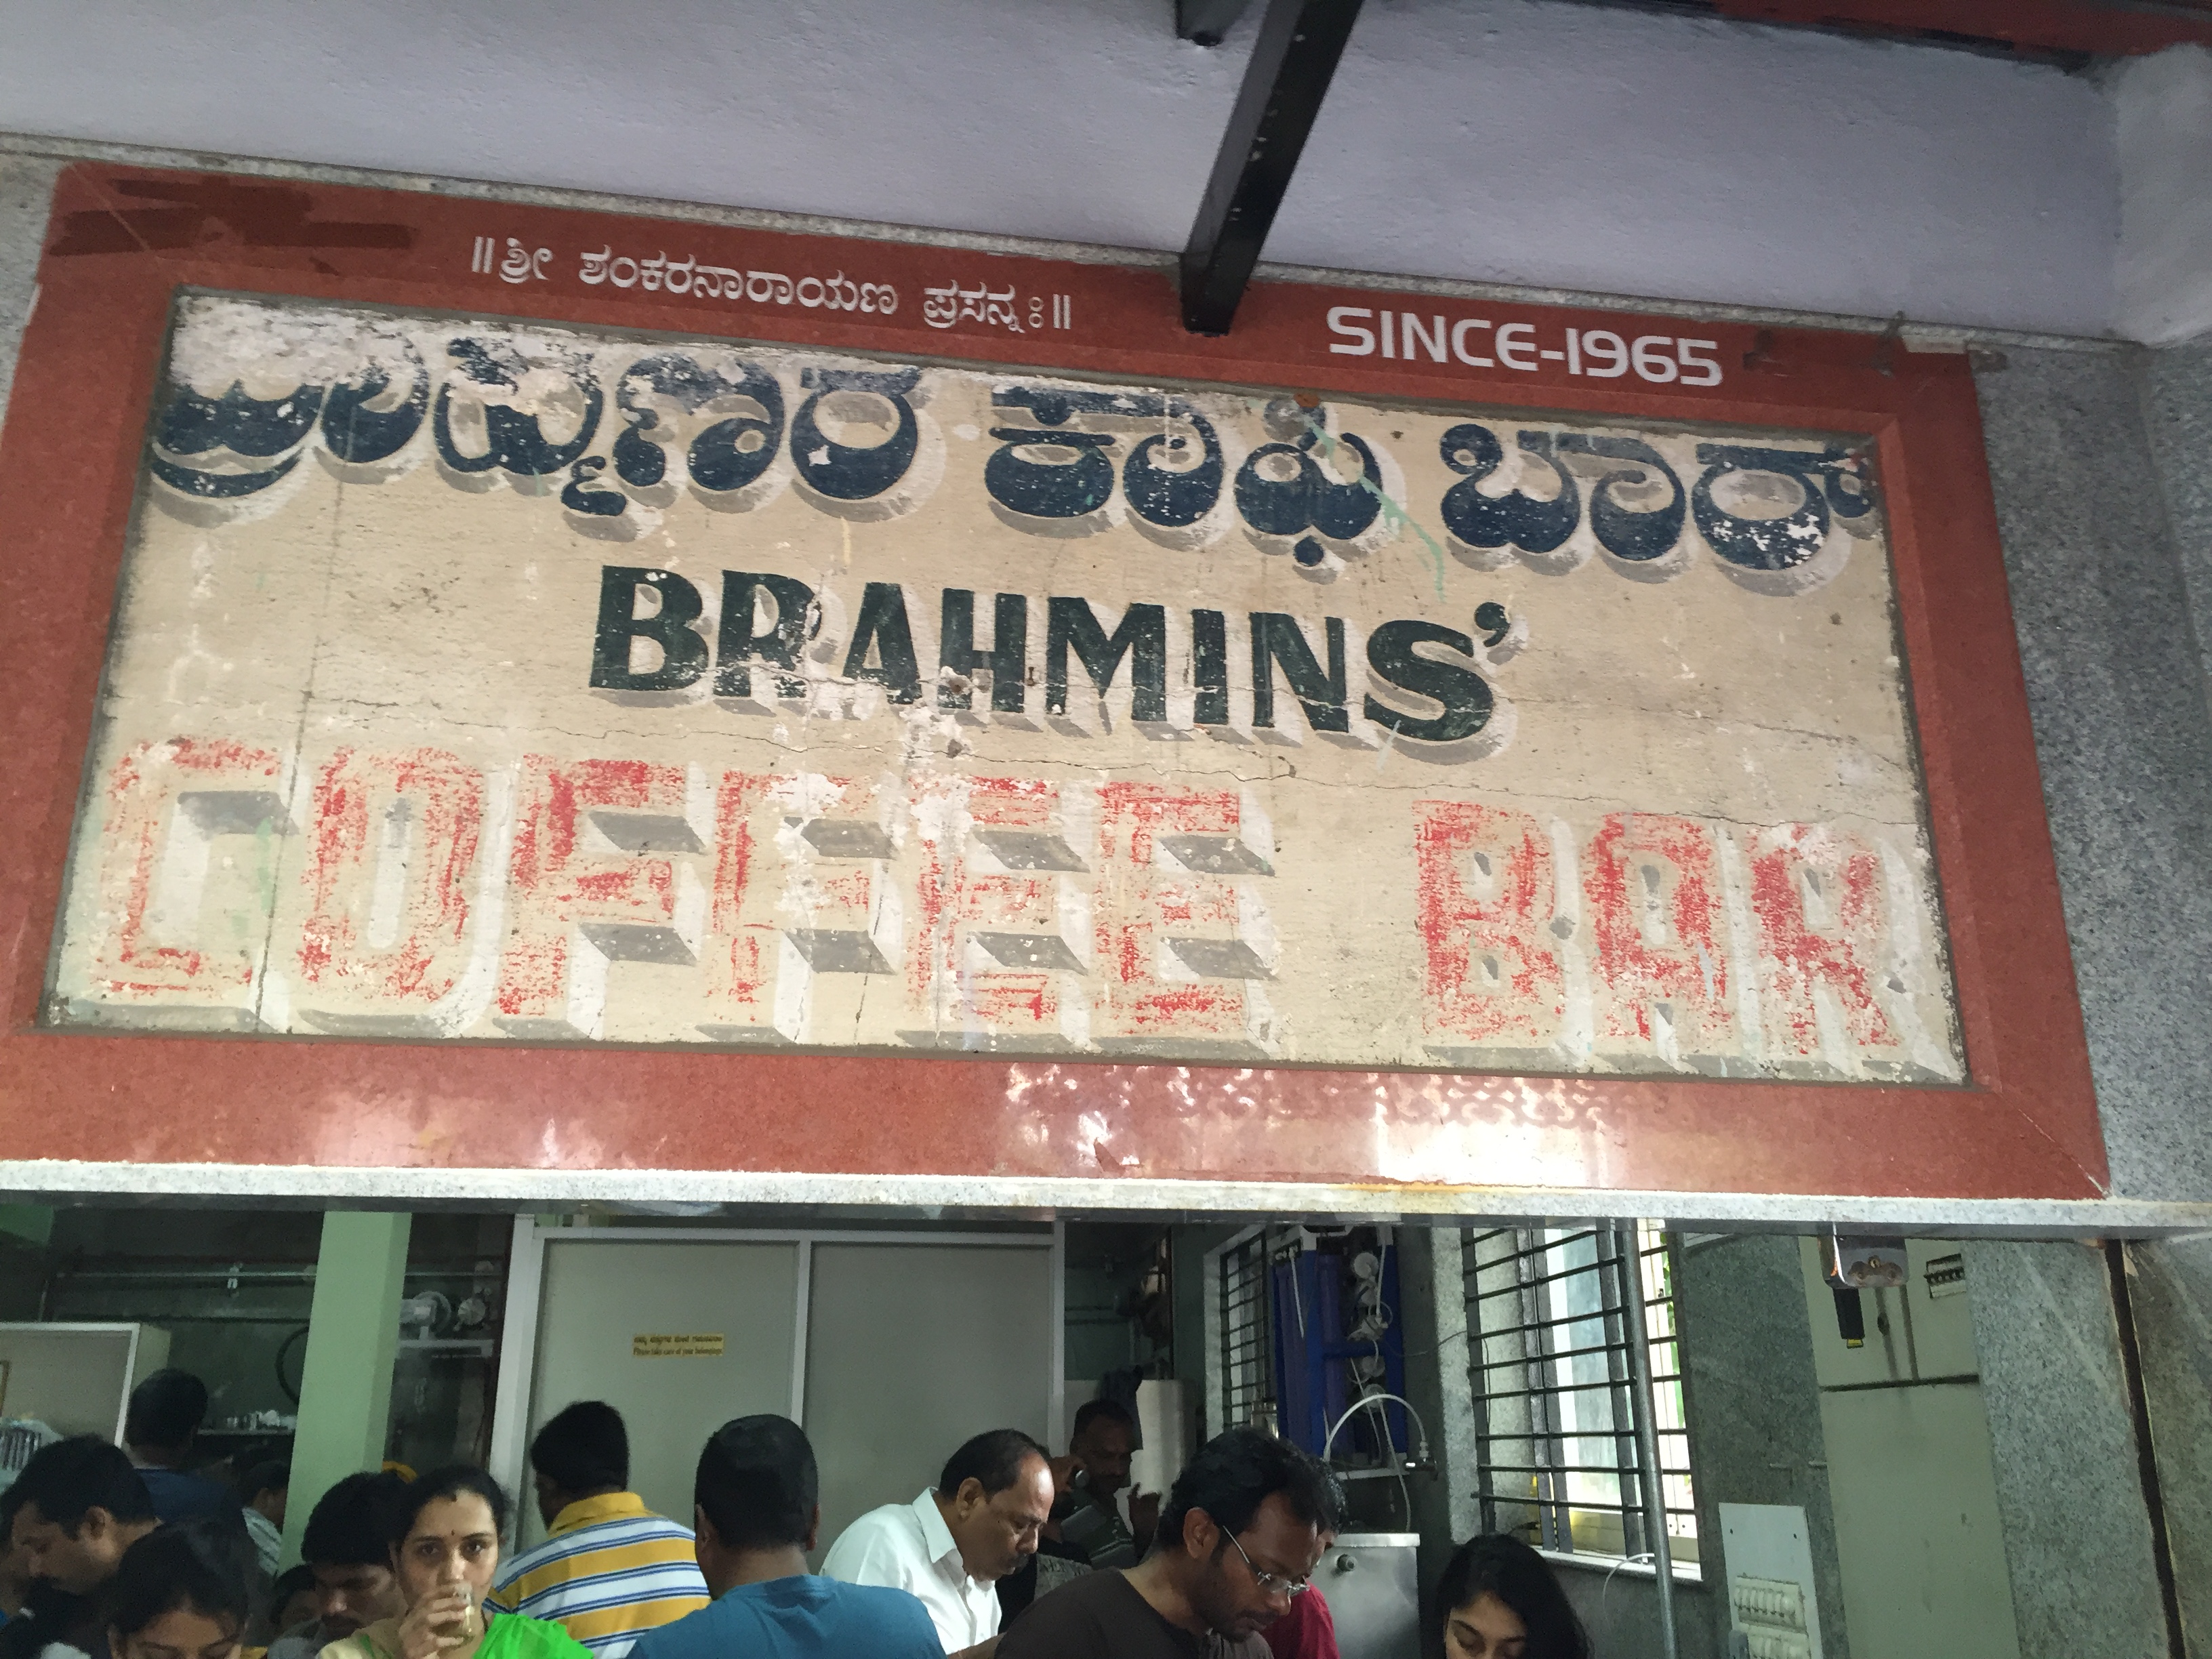 An exclusive take on the origin of Brahmins in Bangalore